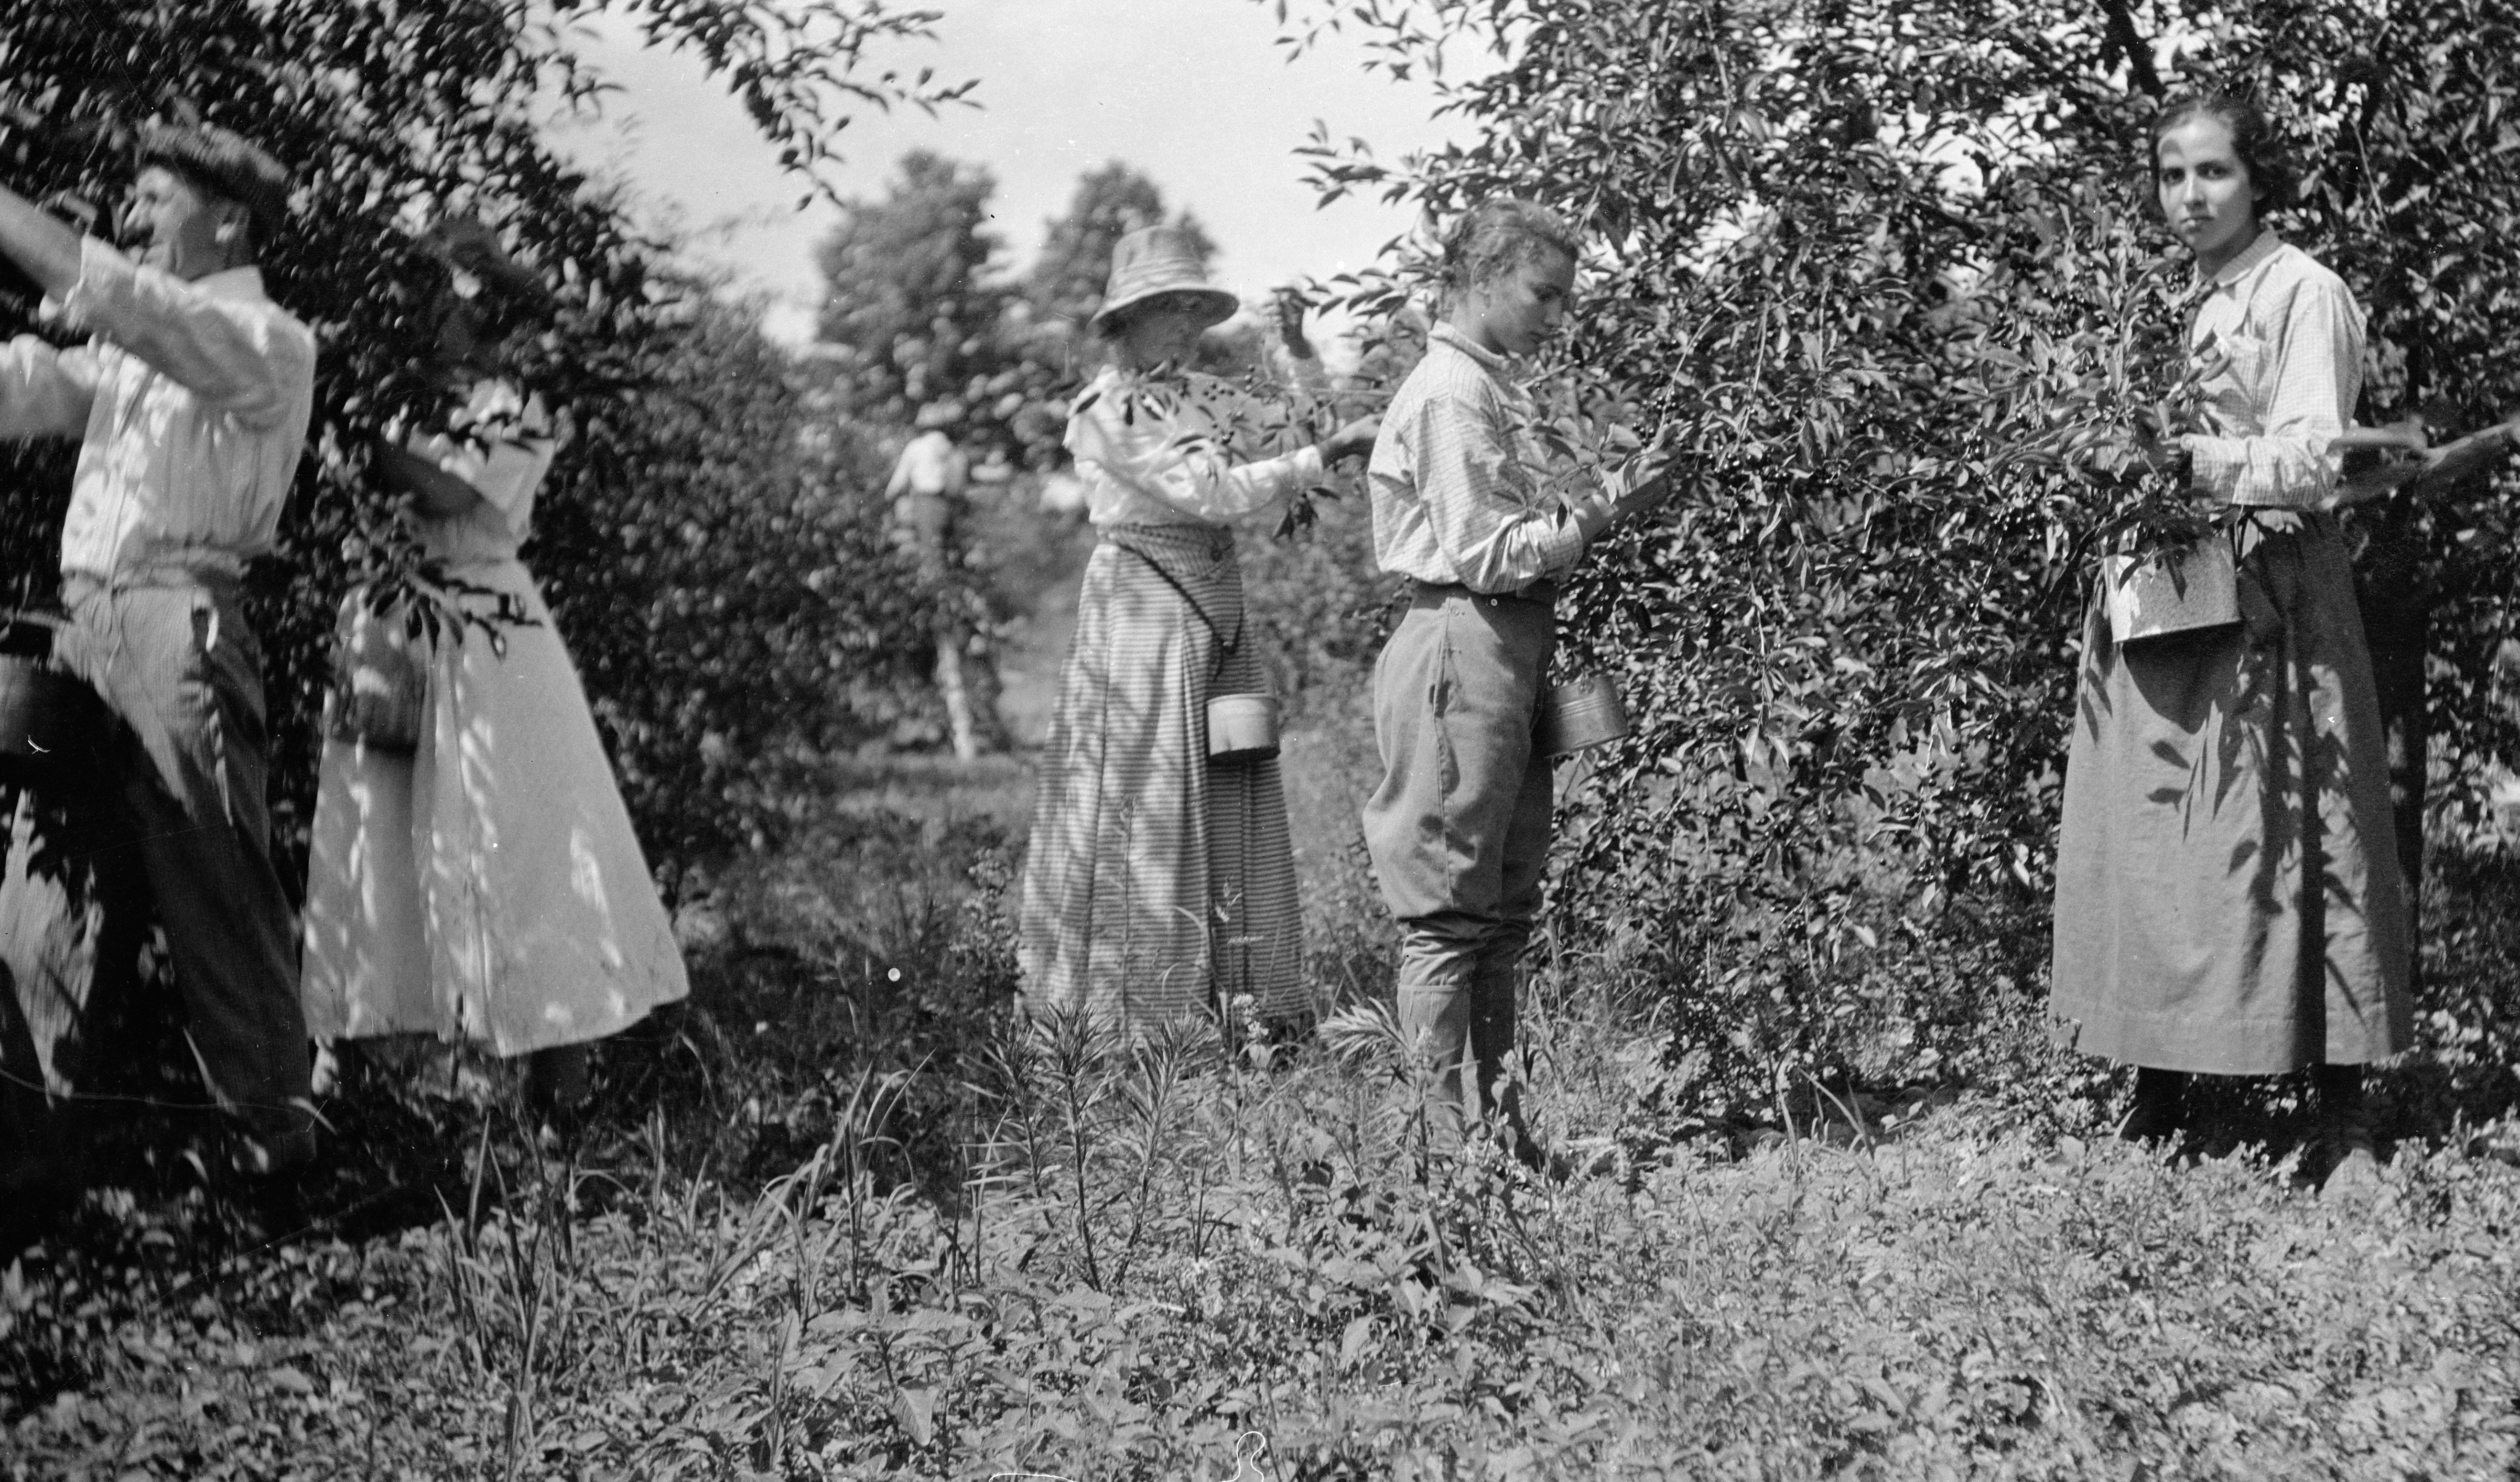 People Plucking Cherries Image courtesy of the Wisconsin Historical Society. Image ID: 93442.